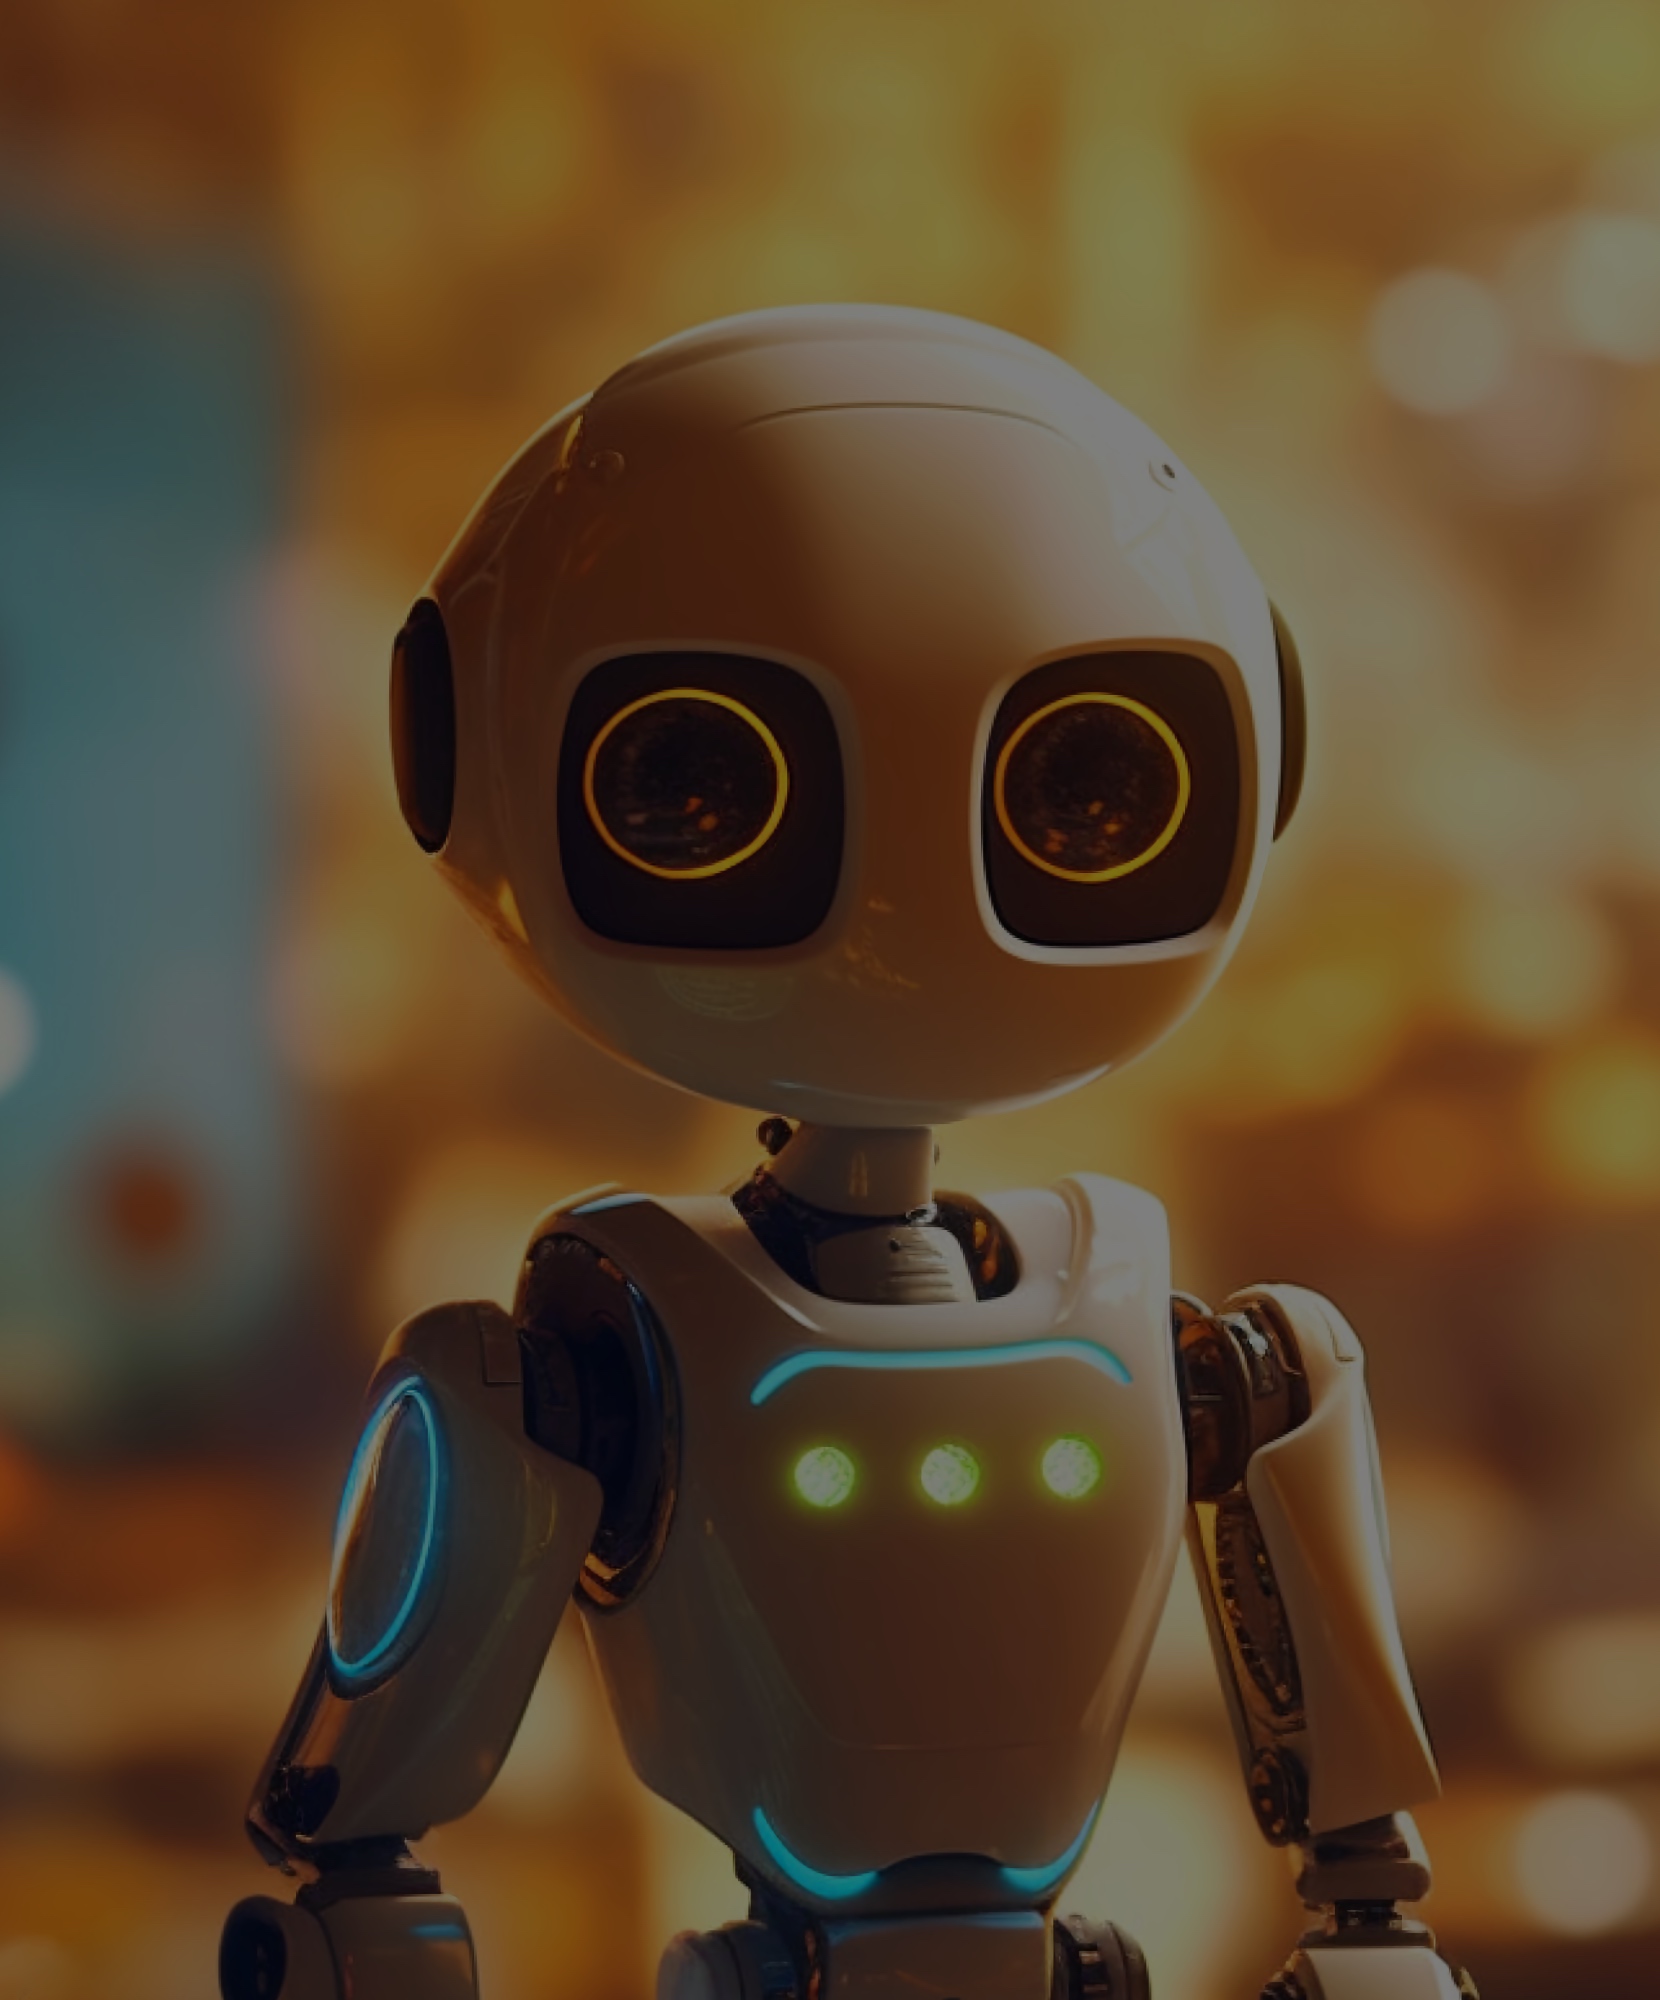 A cute animation of an A.I. robot in a modern office during golden hour.